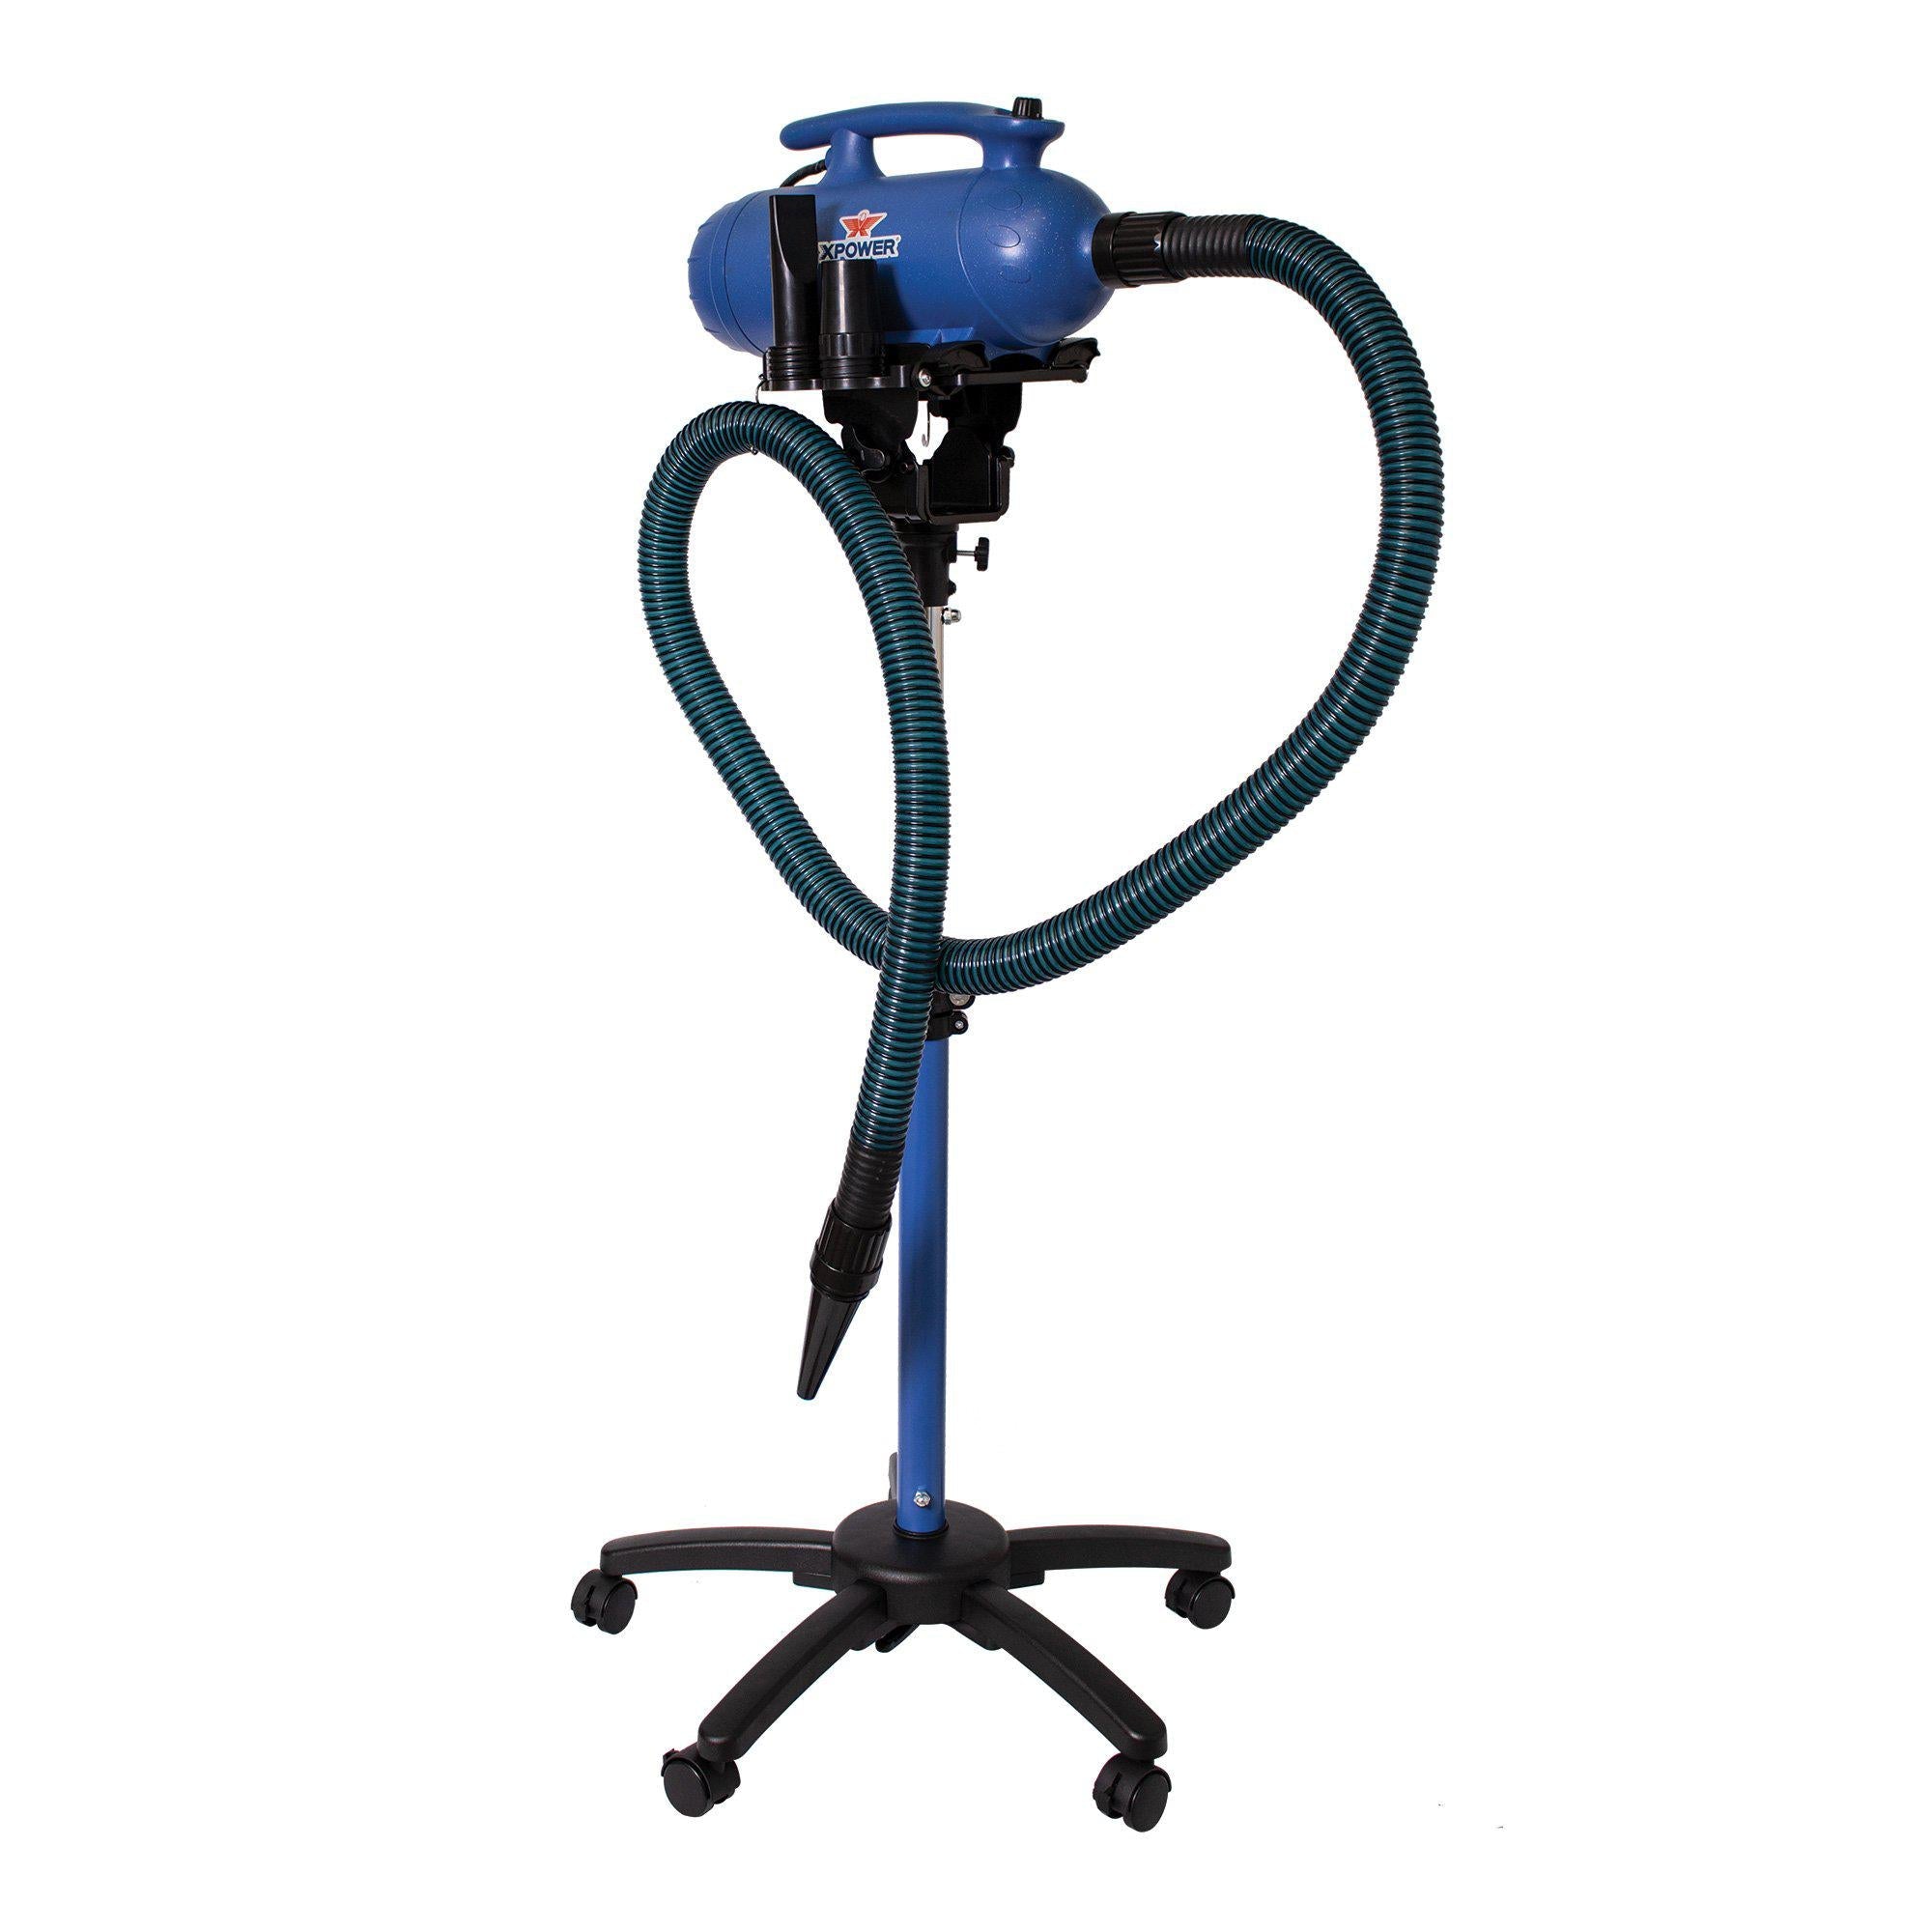 XPOWER B-25 Pro Force Plus Double Motor Dog Grooming Force Pet Dryer (4 HP)